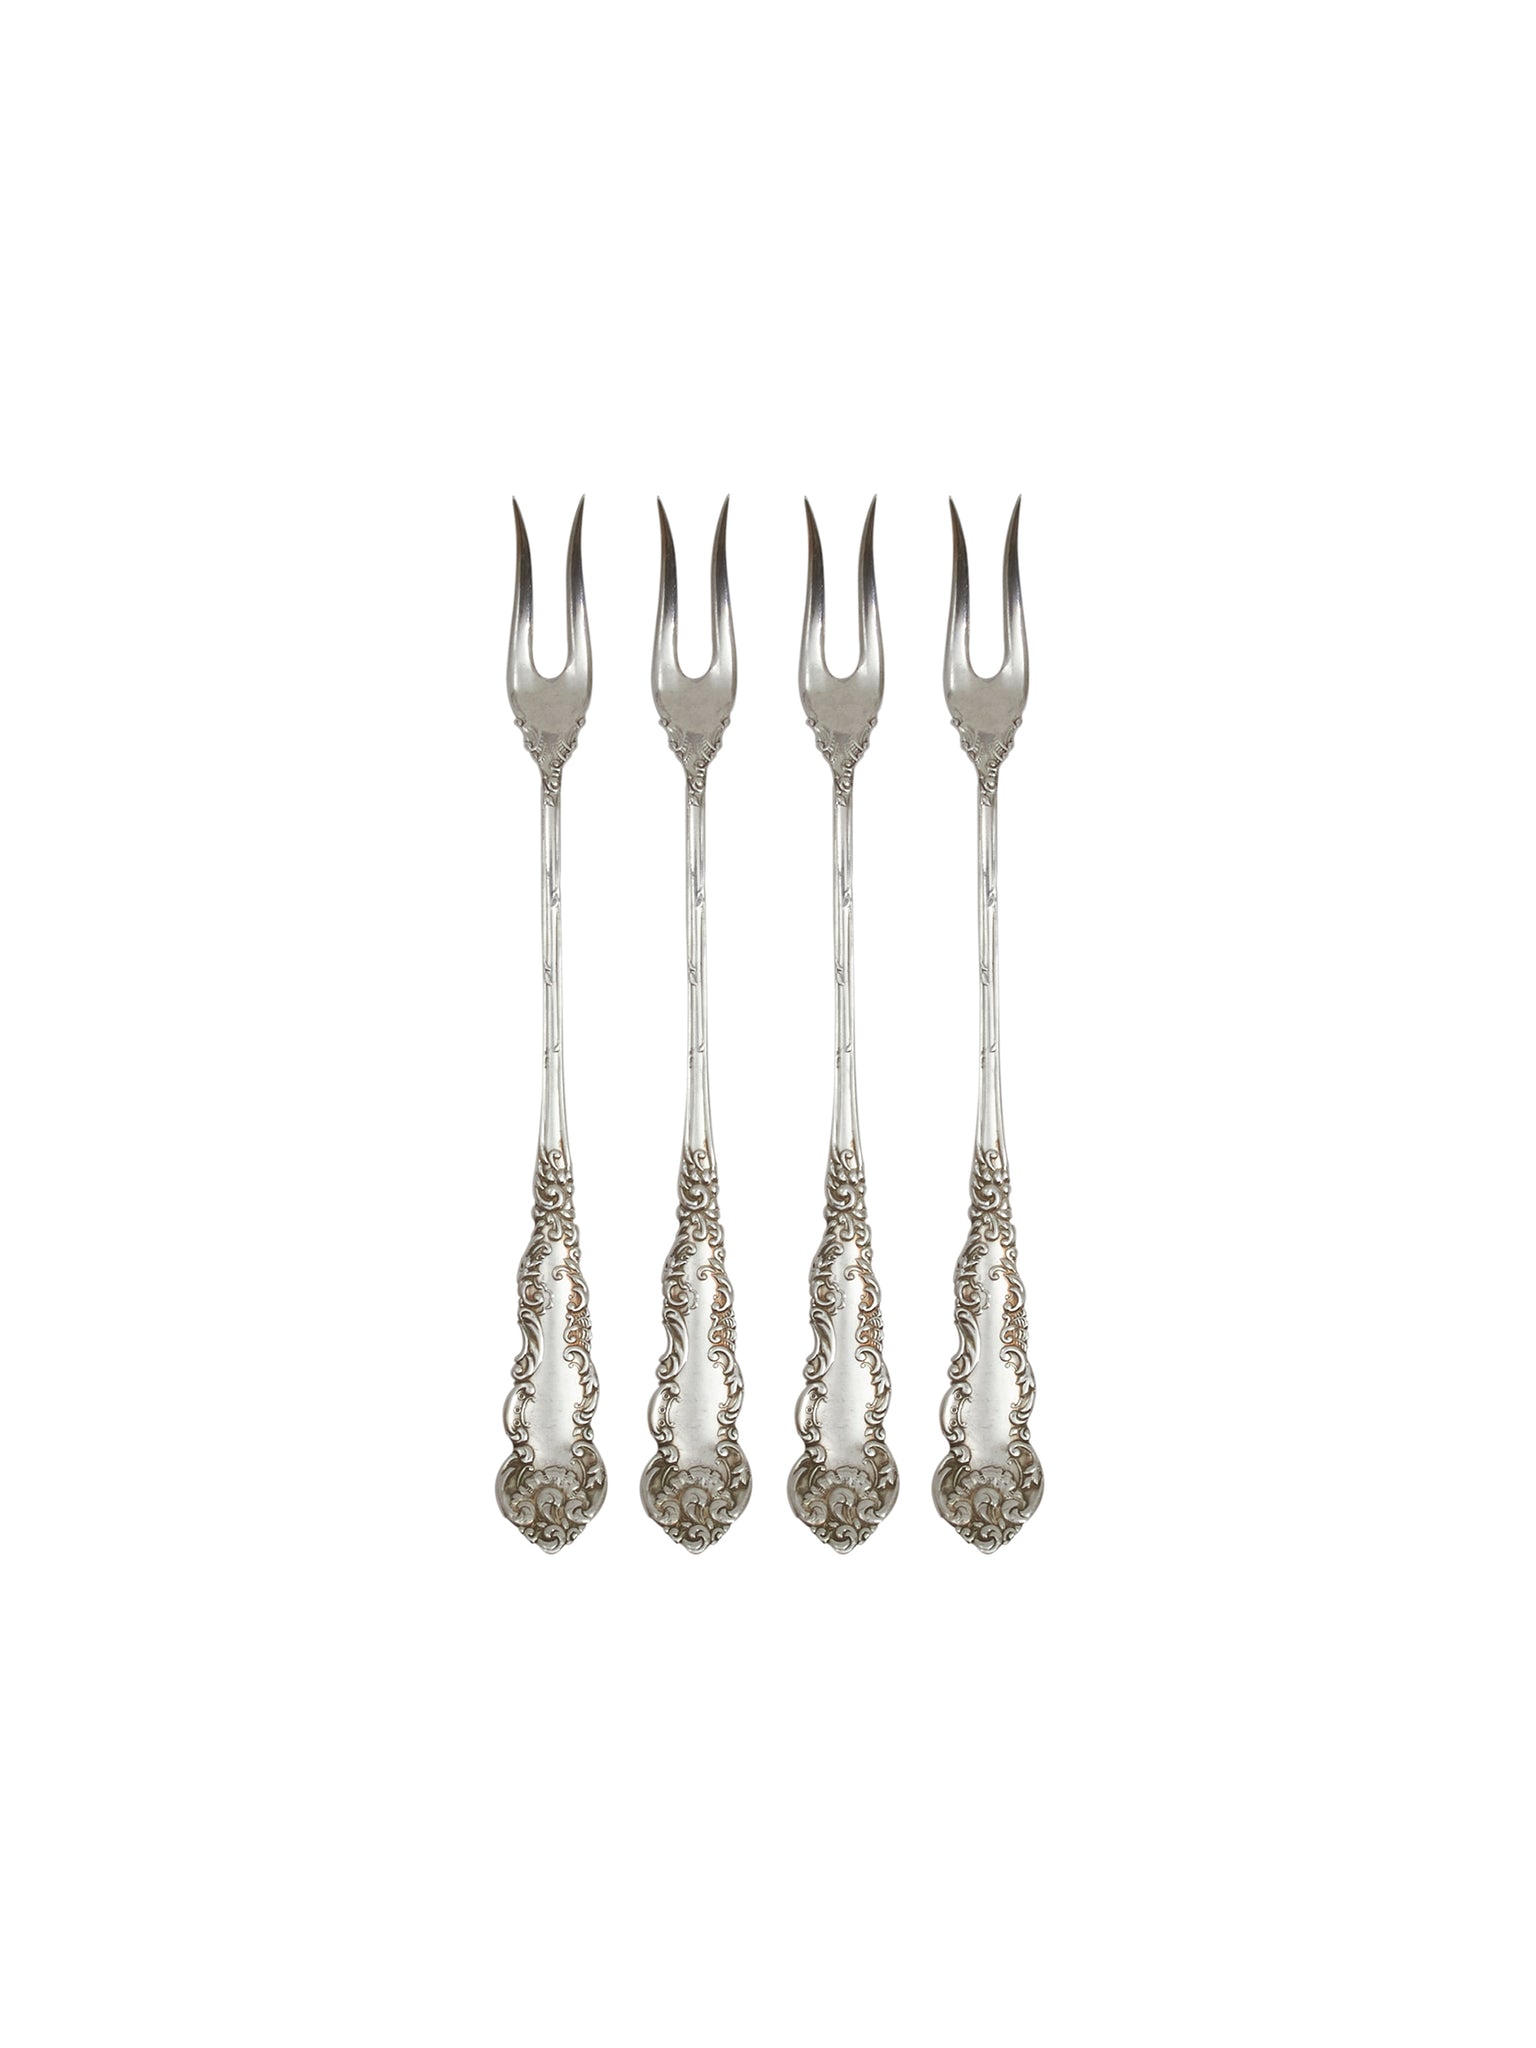 Vintage 1940s Rogers and Co Two Pronged Oyster Forks Set of Four Weston Table